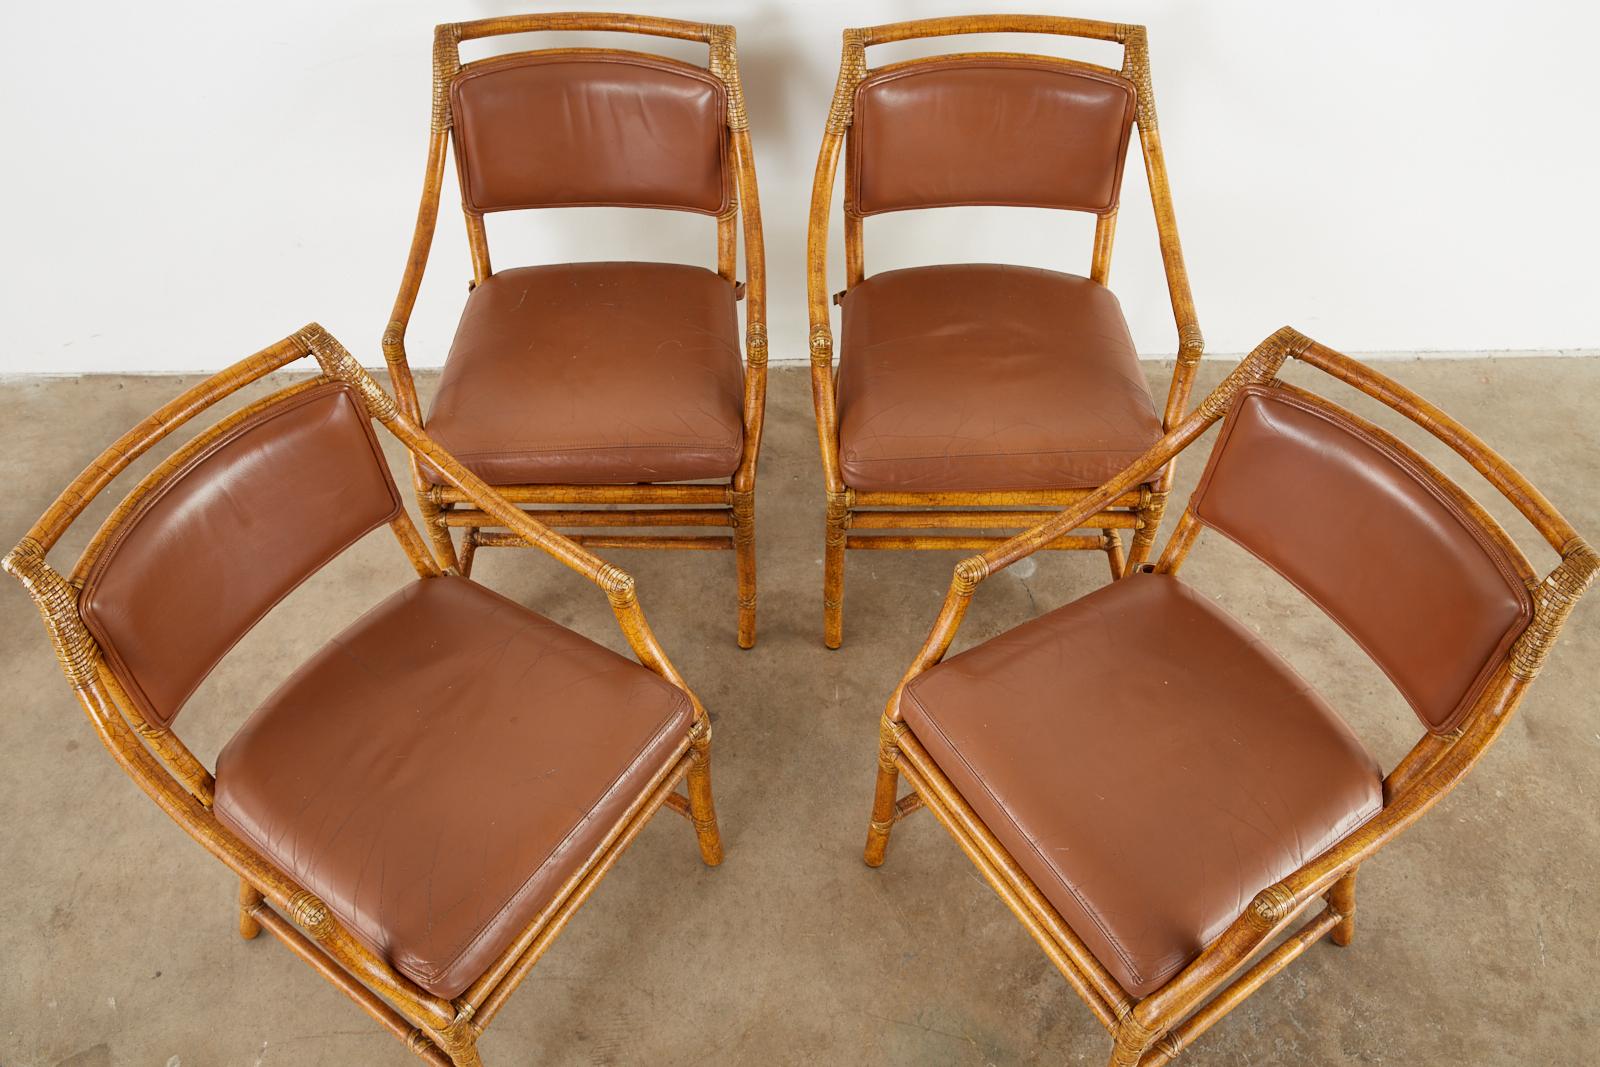 Bespoke set of four genuine McGuire bamboo rattan dining armchairs with leather upholstery. These chairs were custom ordered with a hand-applied craquelure lacquer finish for an intentionally aged look. Rarely seen optional finish from the McGuire